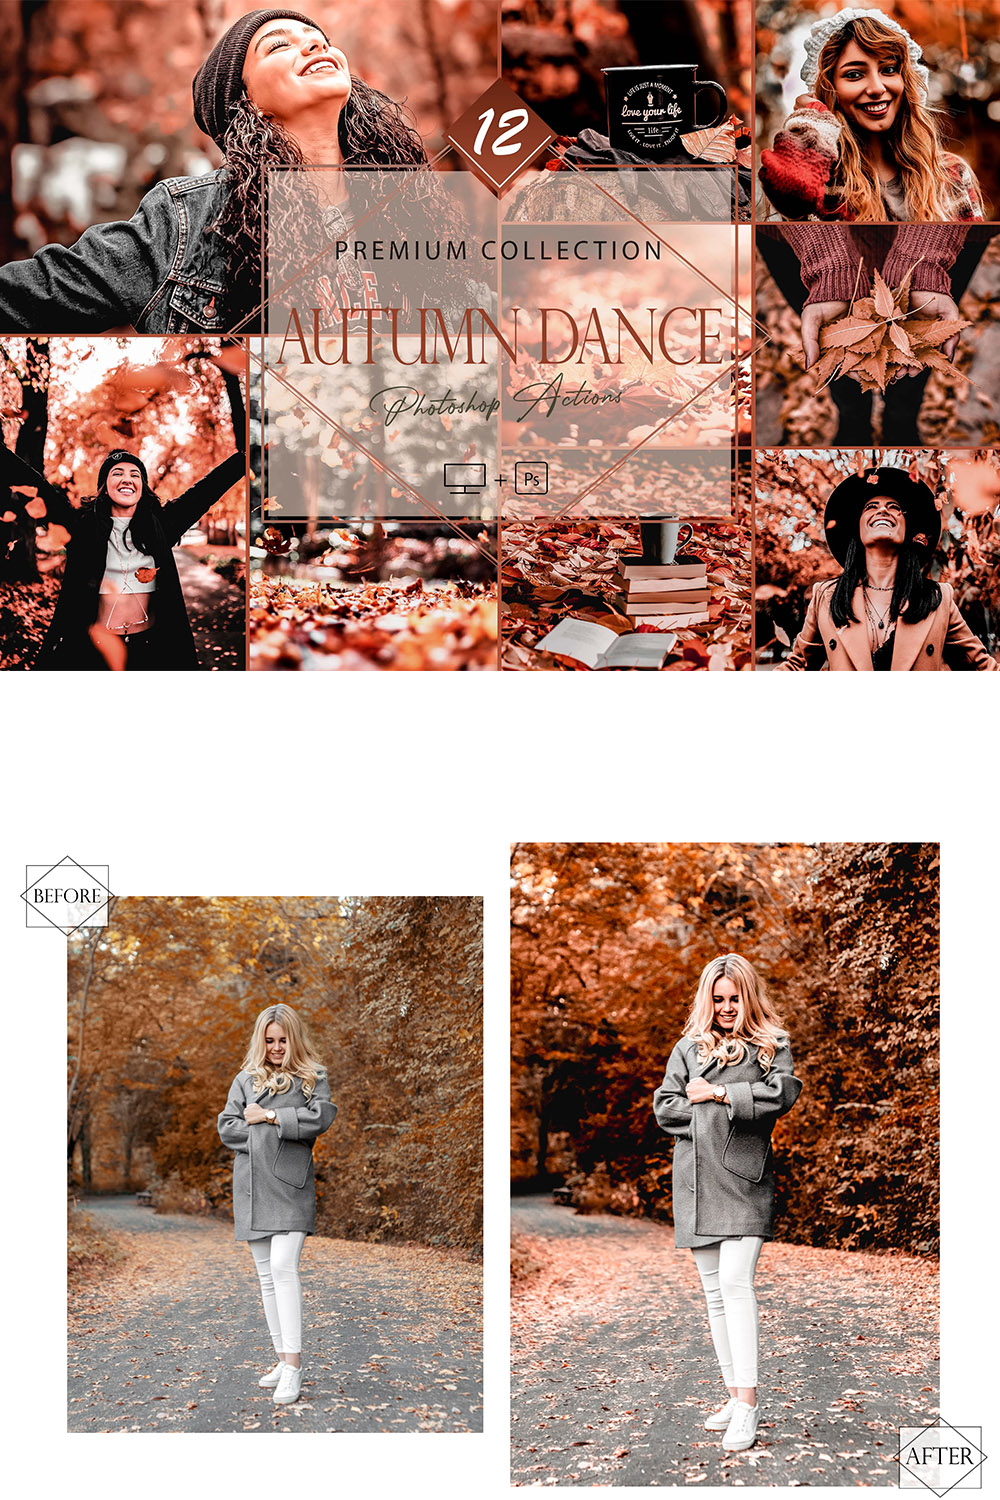 12 Photoshop Actions, Autumn Dance Ps Action, Orange ACR Preset, Saturation Filter, Lifestyle Theme For Instagram, Fall Blogger Instagram , Top Theme pinterest preview image.